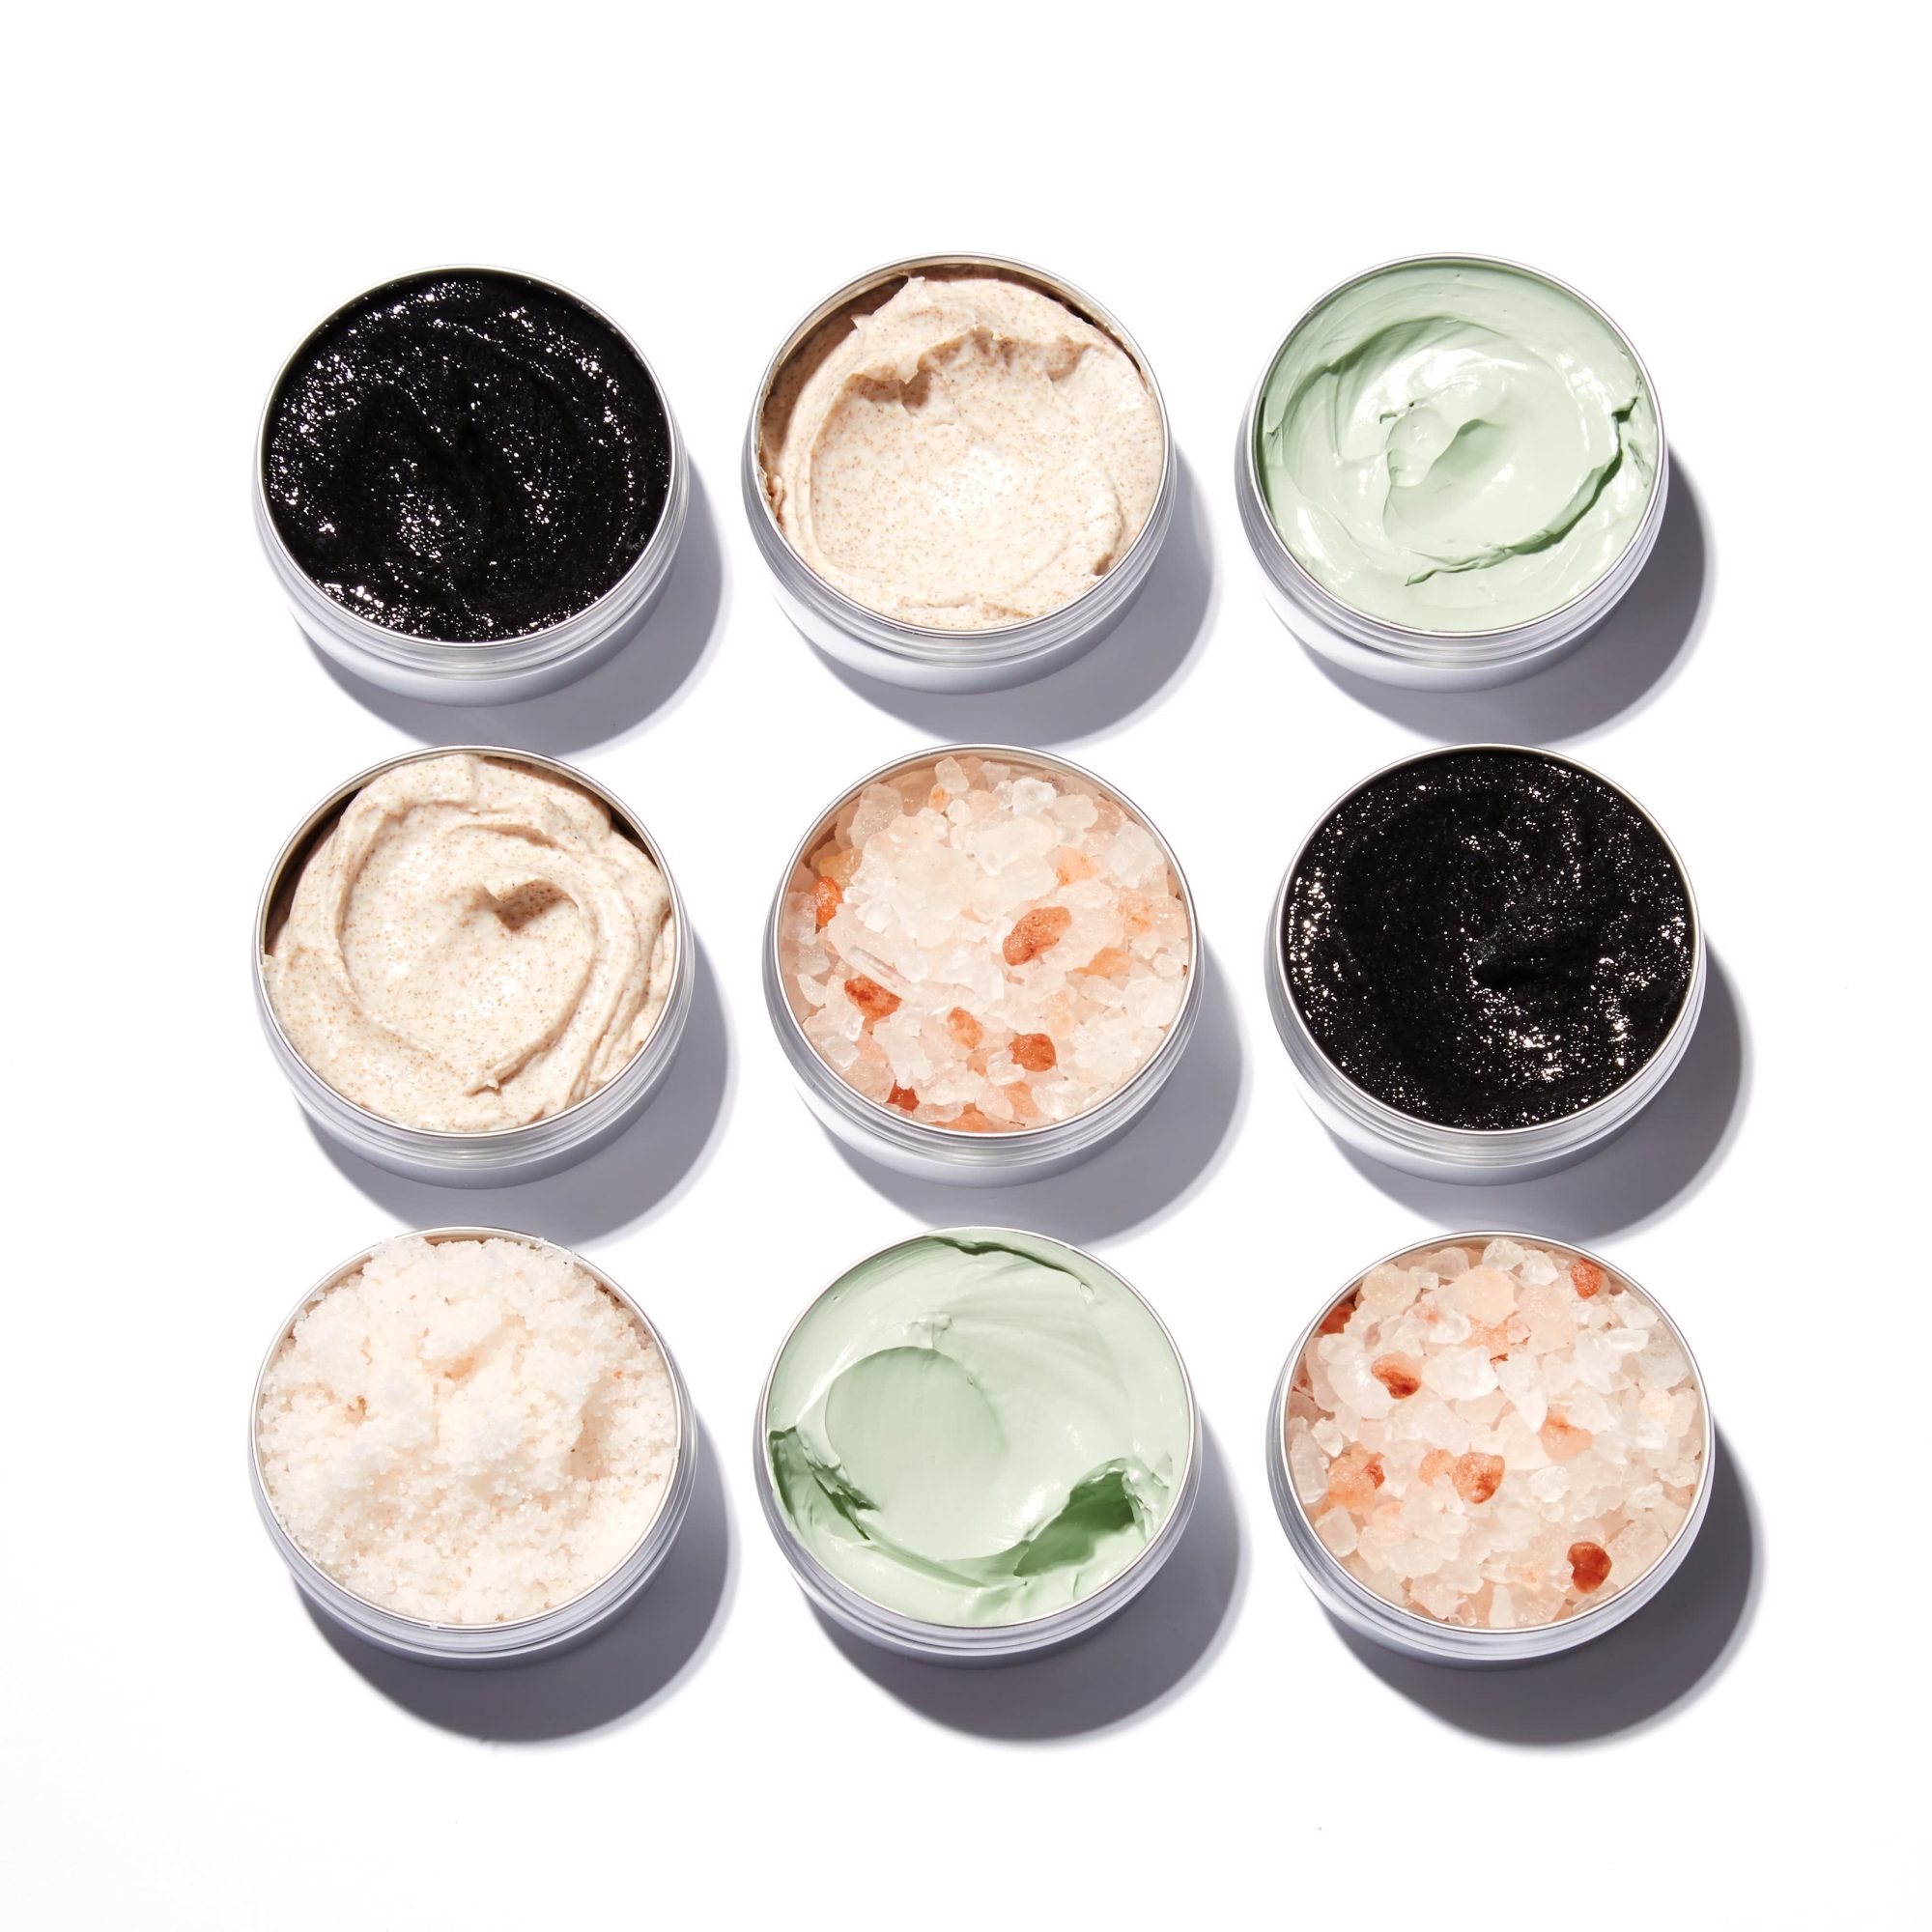 4 Easy Body Scrubs You Can Make at Home With Ingredients Already in Your Kitchen